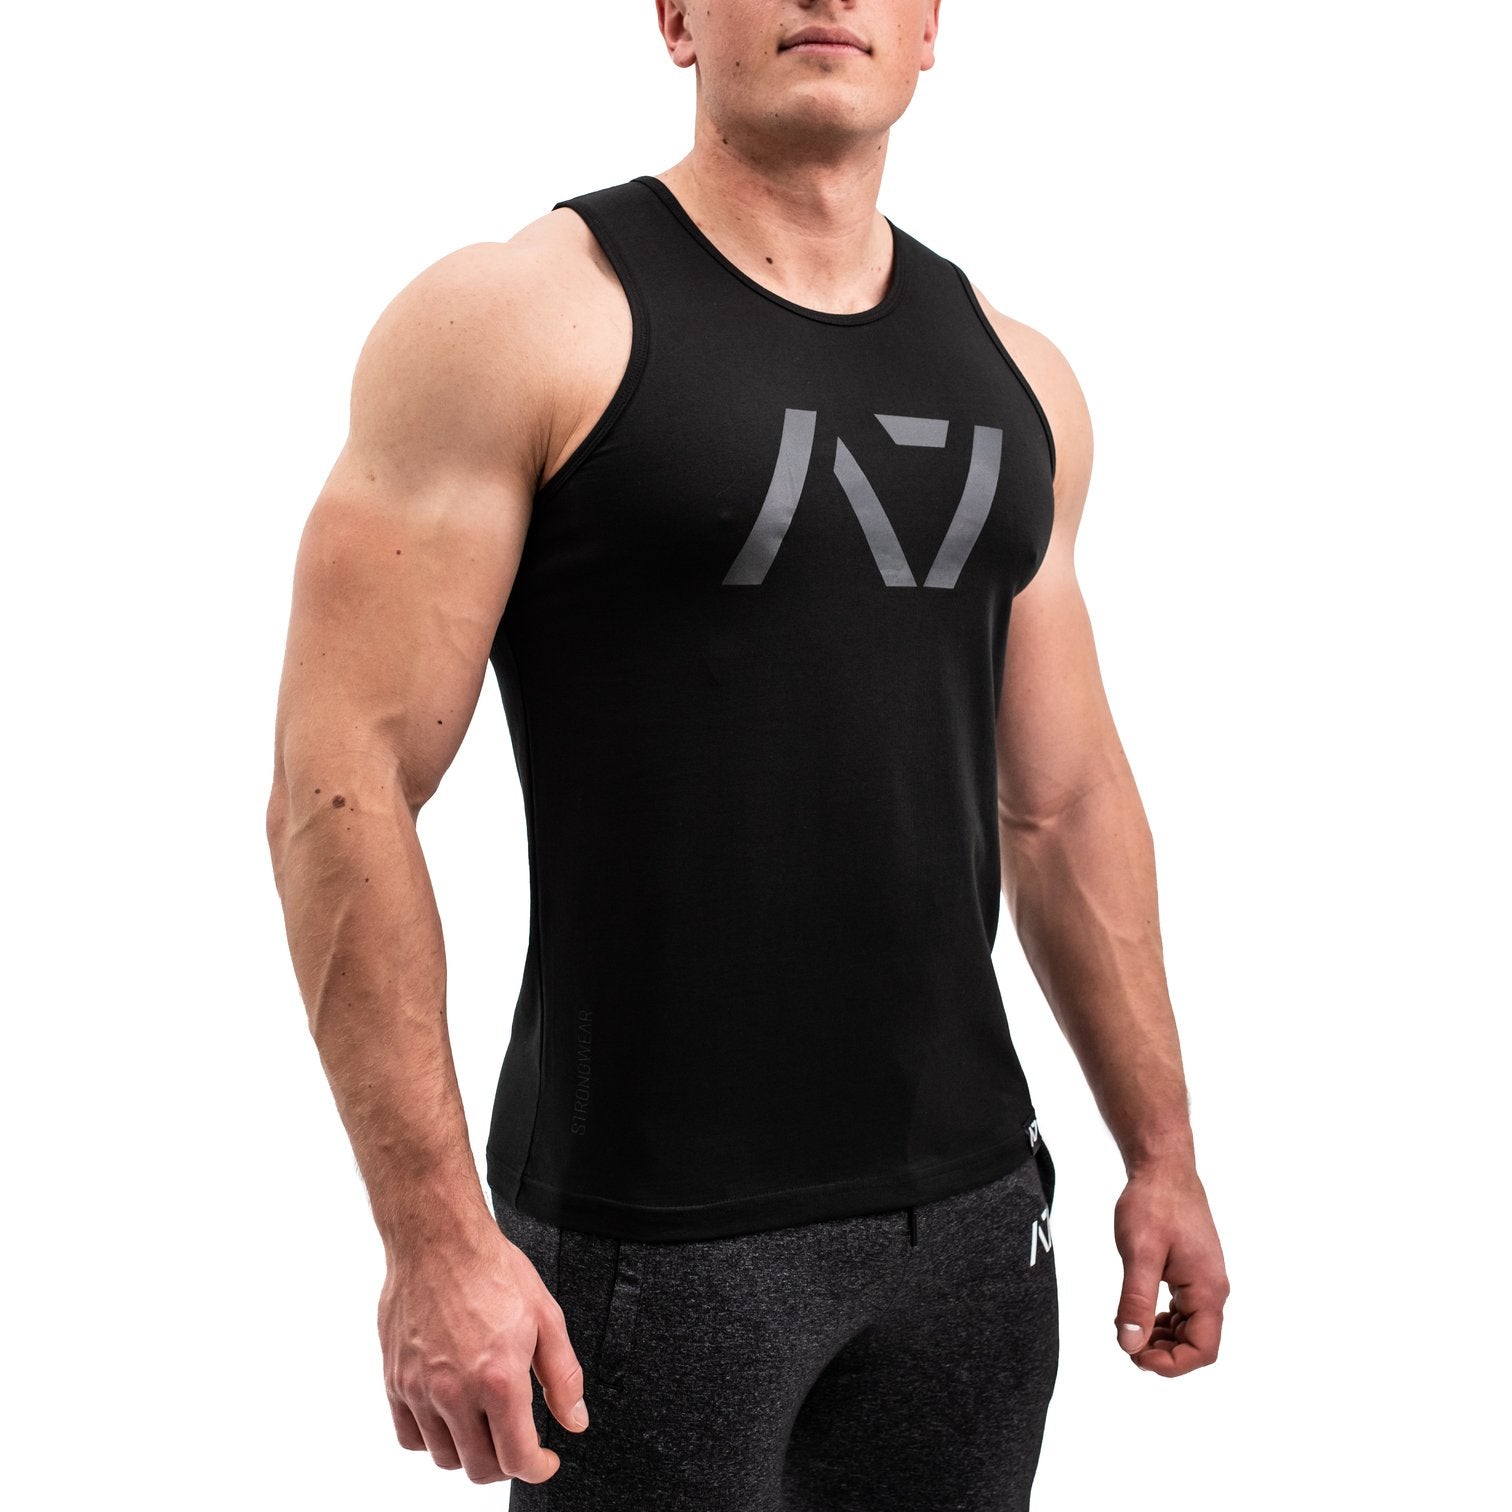 Stealth Bar Grip Tank, great as a squat shirt. Purchase Stealth Bar Grip tank UK from A7 UK. Purchase Stealth Bar Grip Tank Europe from A7 UK. No more chalk and no more sliding. Best Bar Grip Tank Tshirts, shipping to UK and Europe from A7 UK. Stealth is our classic black on black shirt design! The best Powerlifting apparel for all your workouts. Available in UK and Europe including France, Italy, Germany, Sweden and Poland